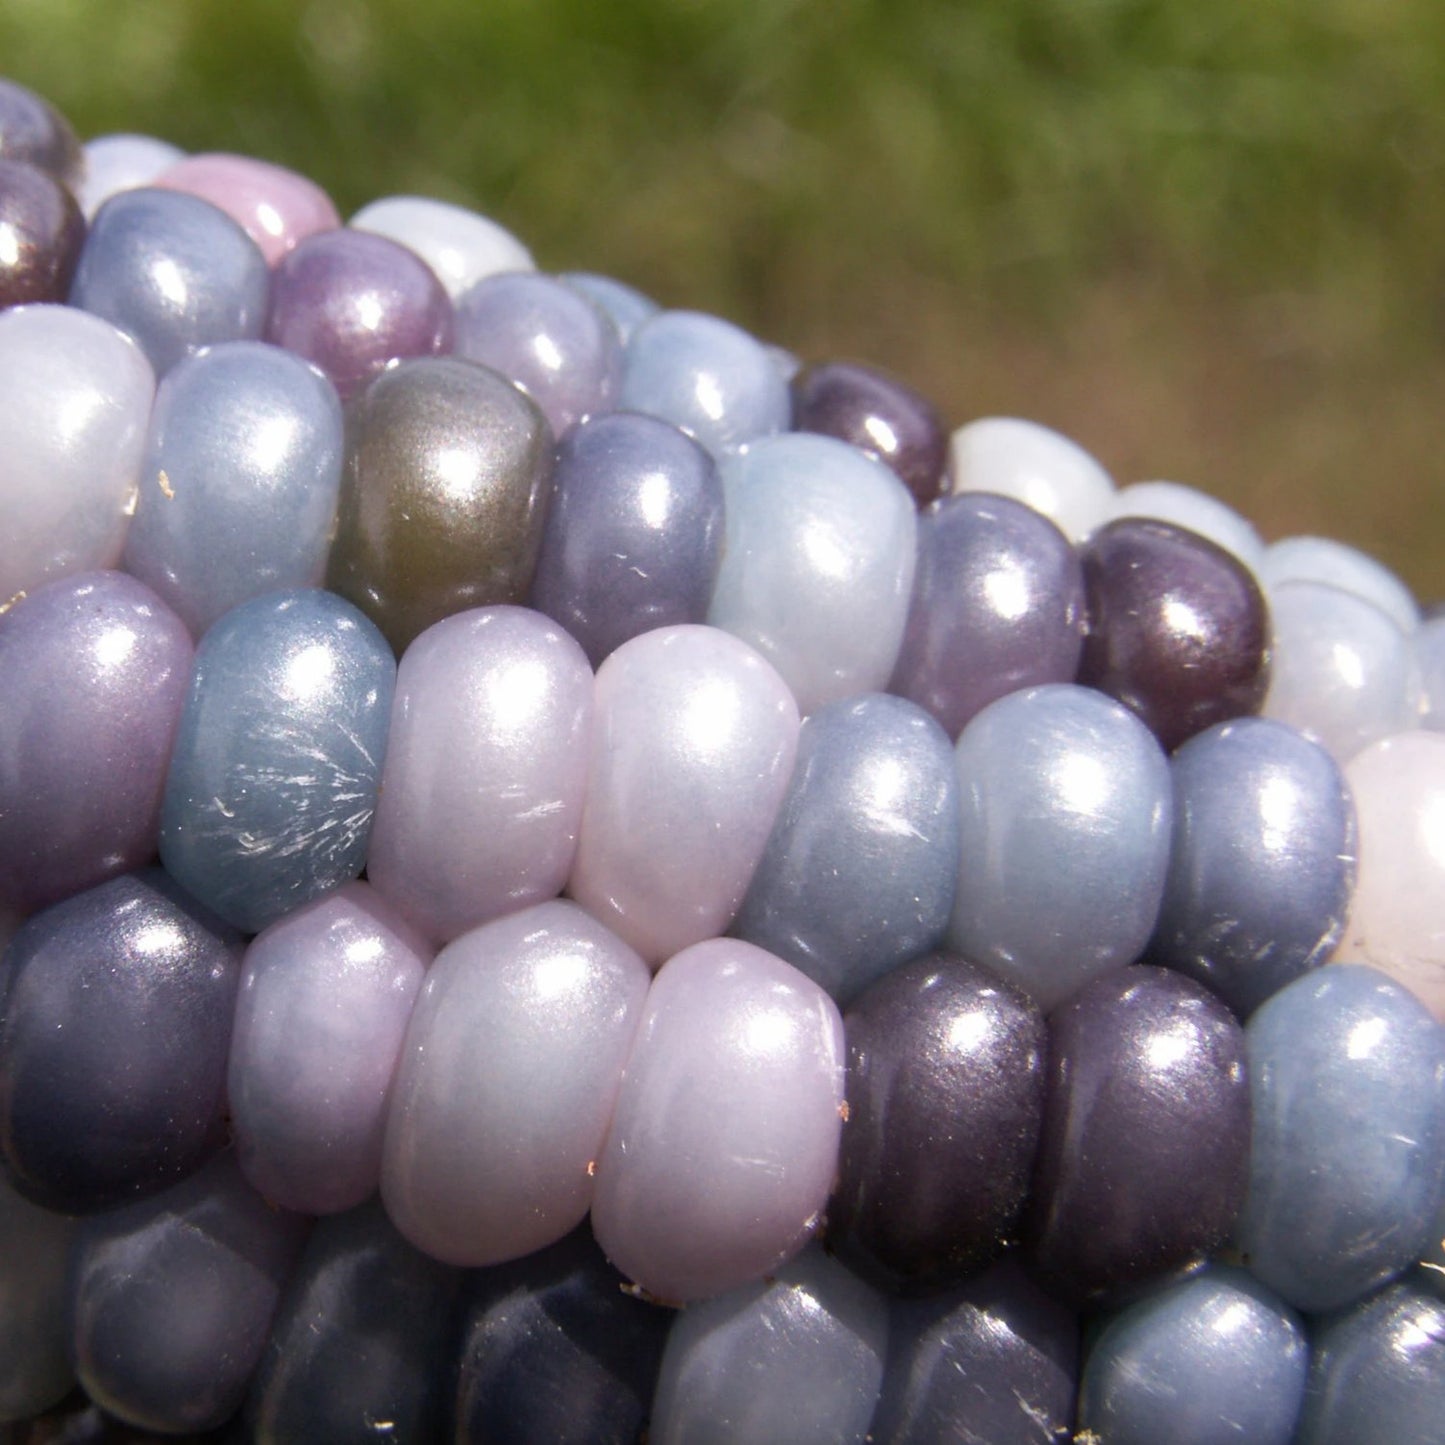 Glass Gem Corn Stock Photos and Pictures - 367 Images